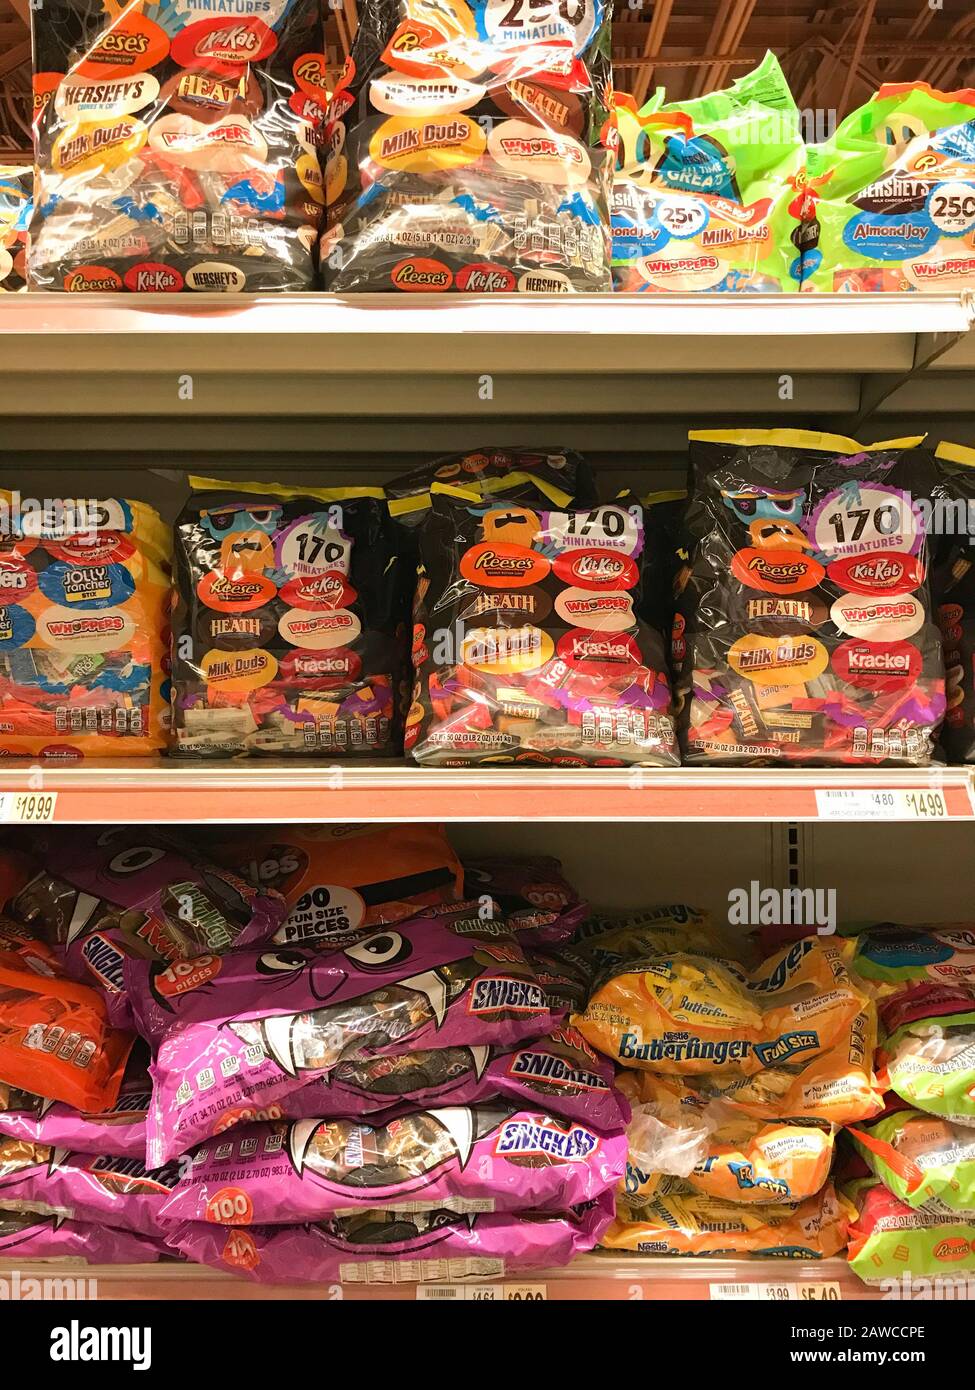 WOODBRIDGE, NEW JERSEY / UNITED STATES - October 17, 2018: A variety of Halloween candy on display at a local supermarket Stock Photo